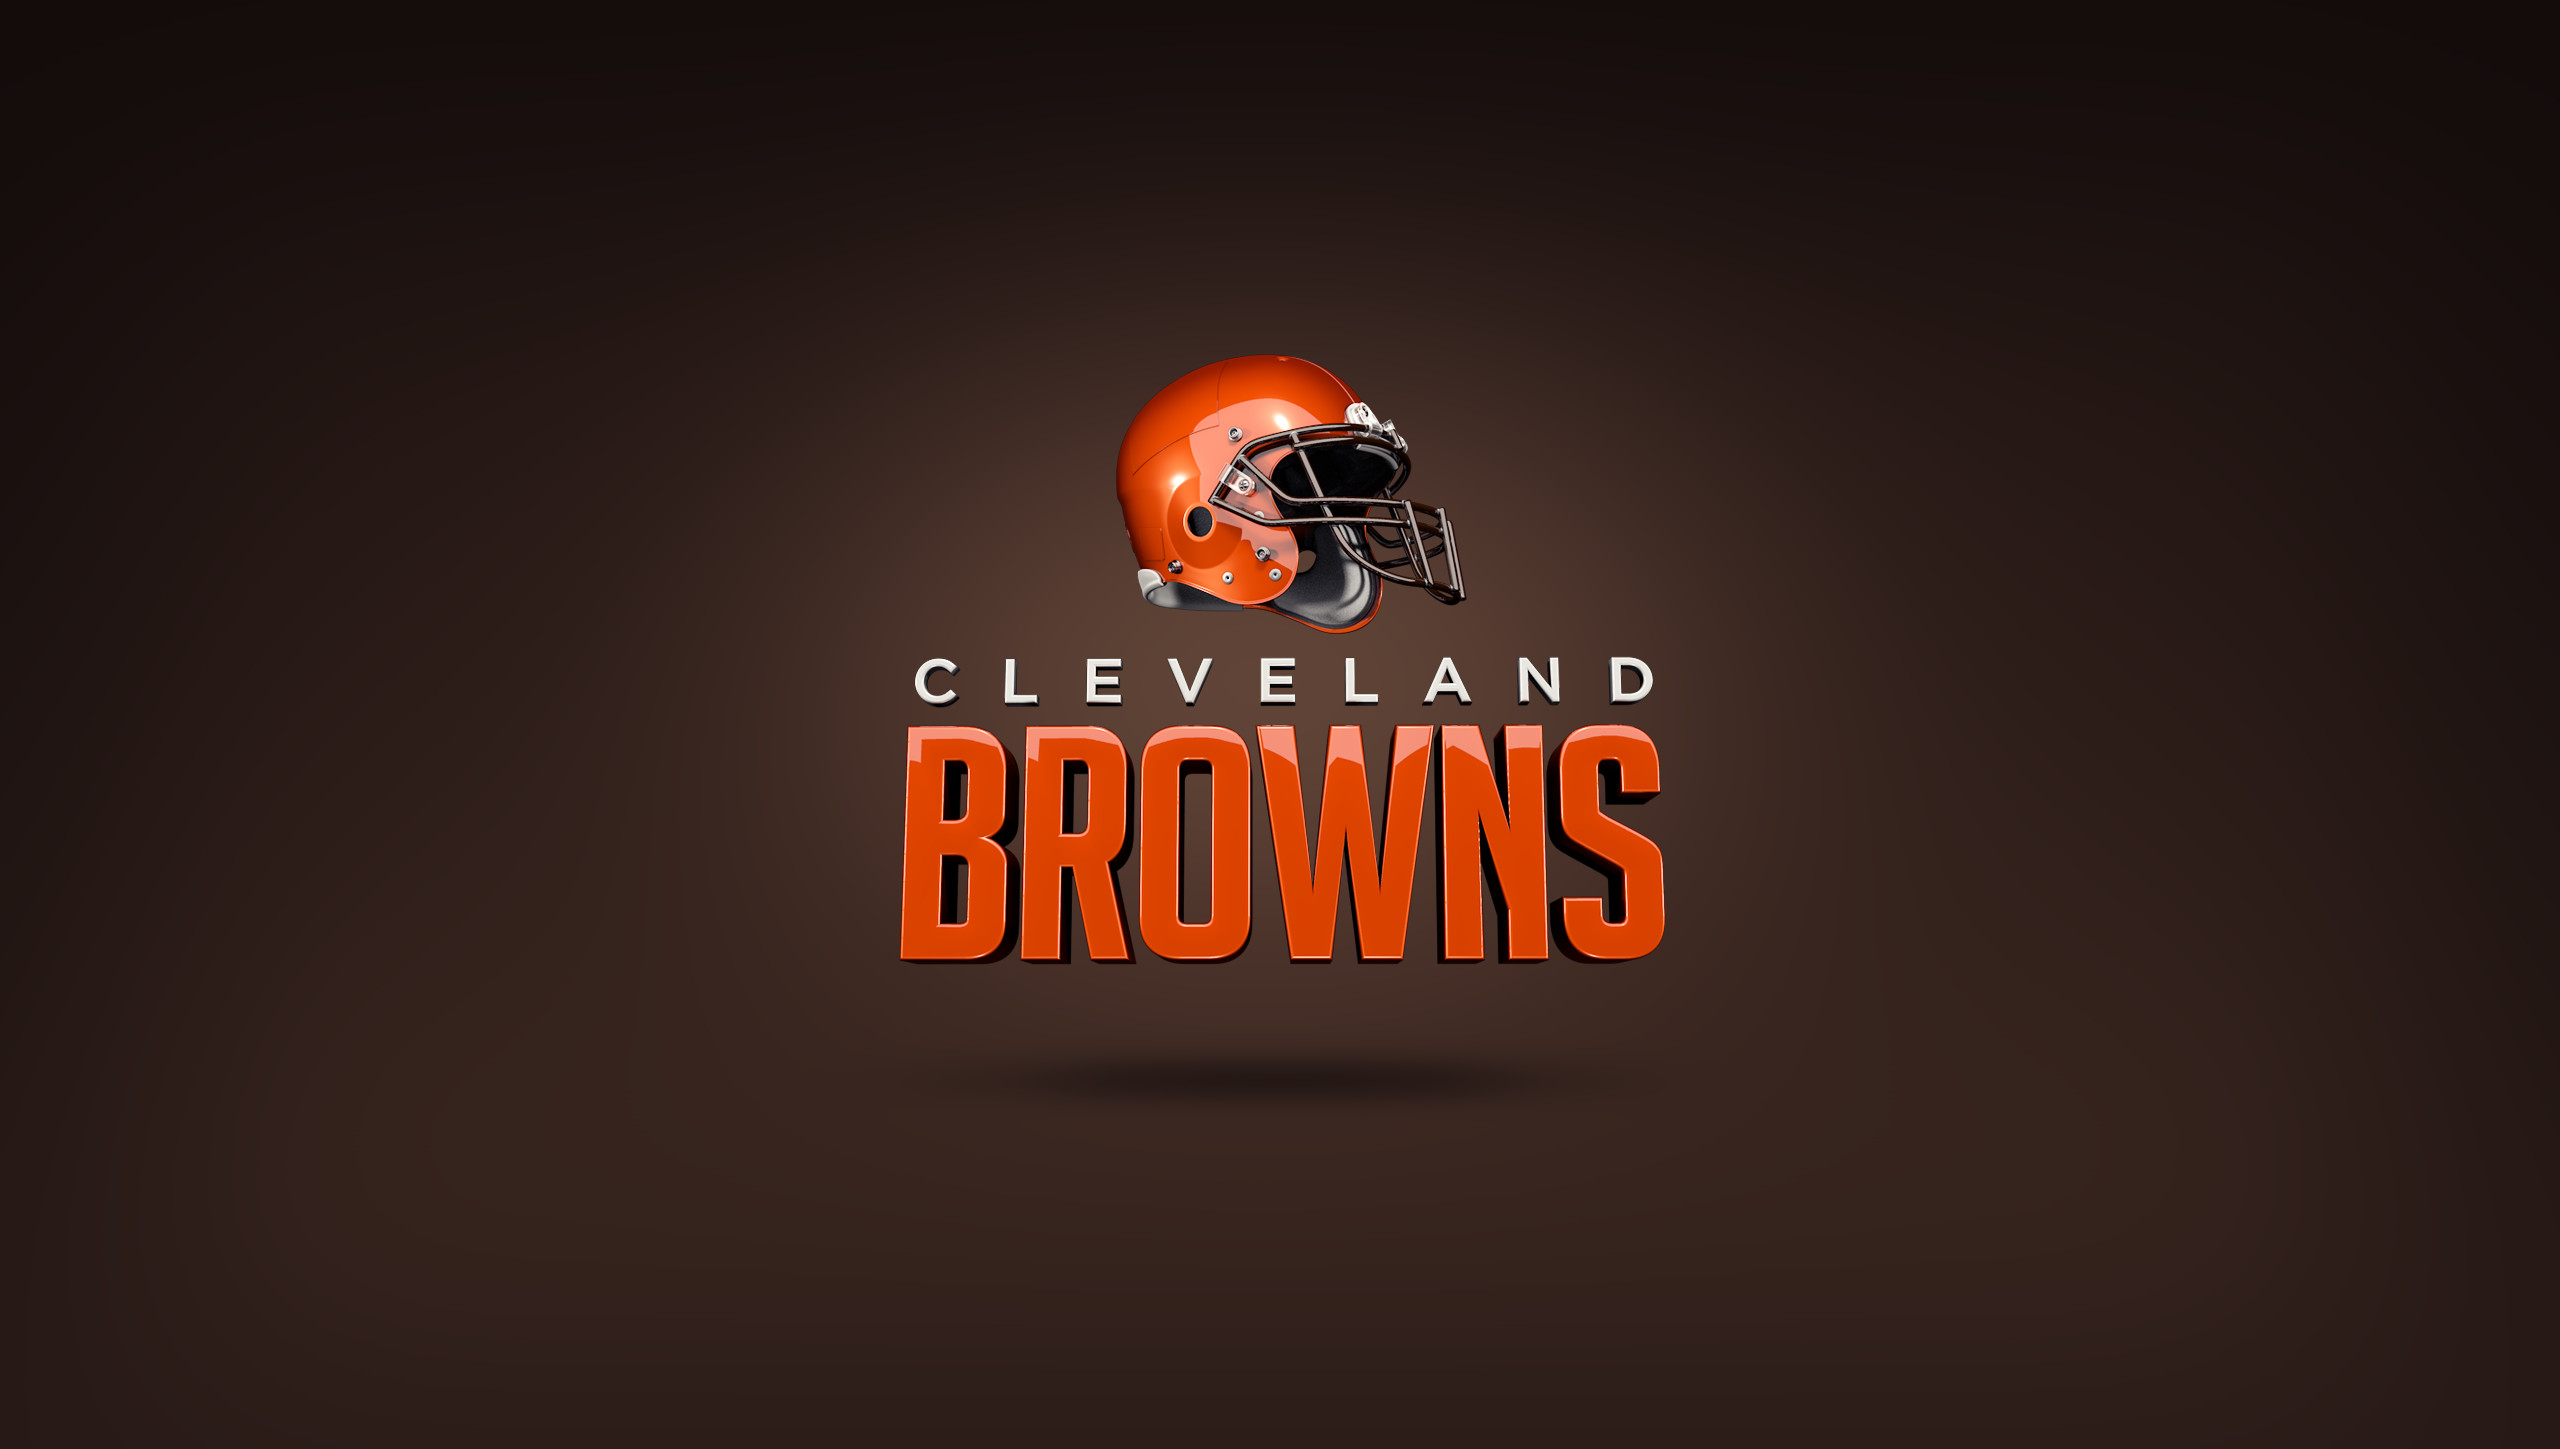 2560x1449 Cleveland Browns Wallpaper, Cleveland Browns Wallpapers and .